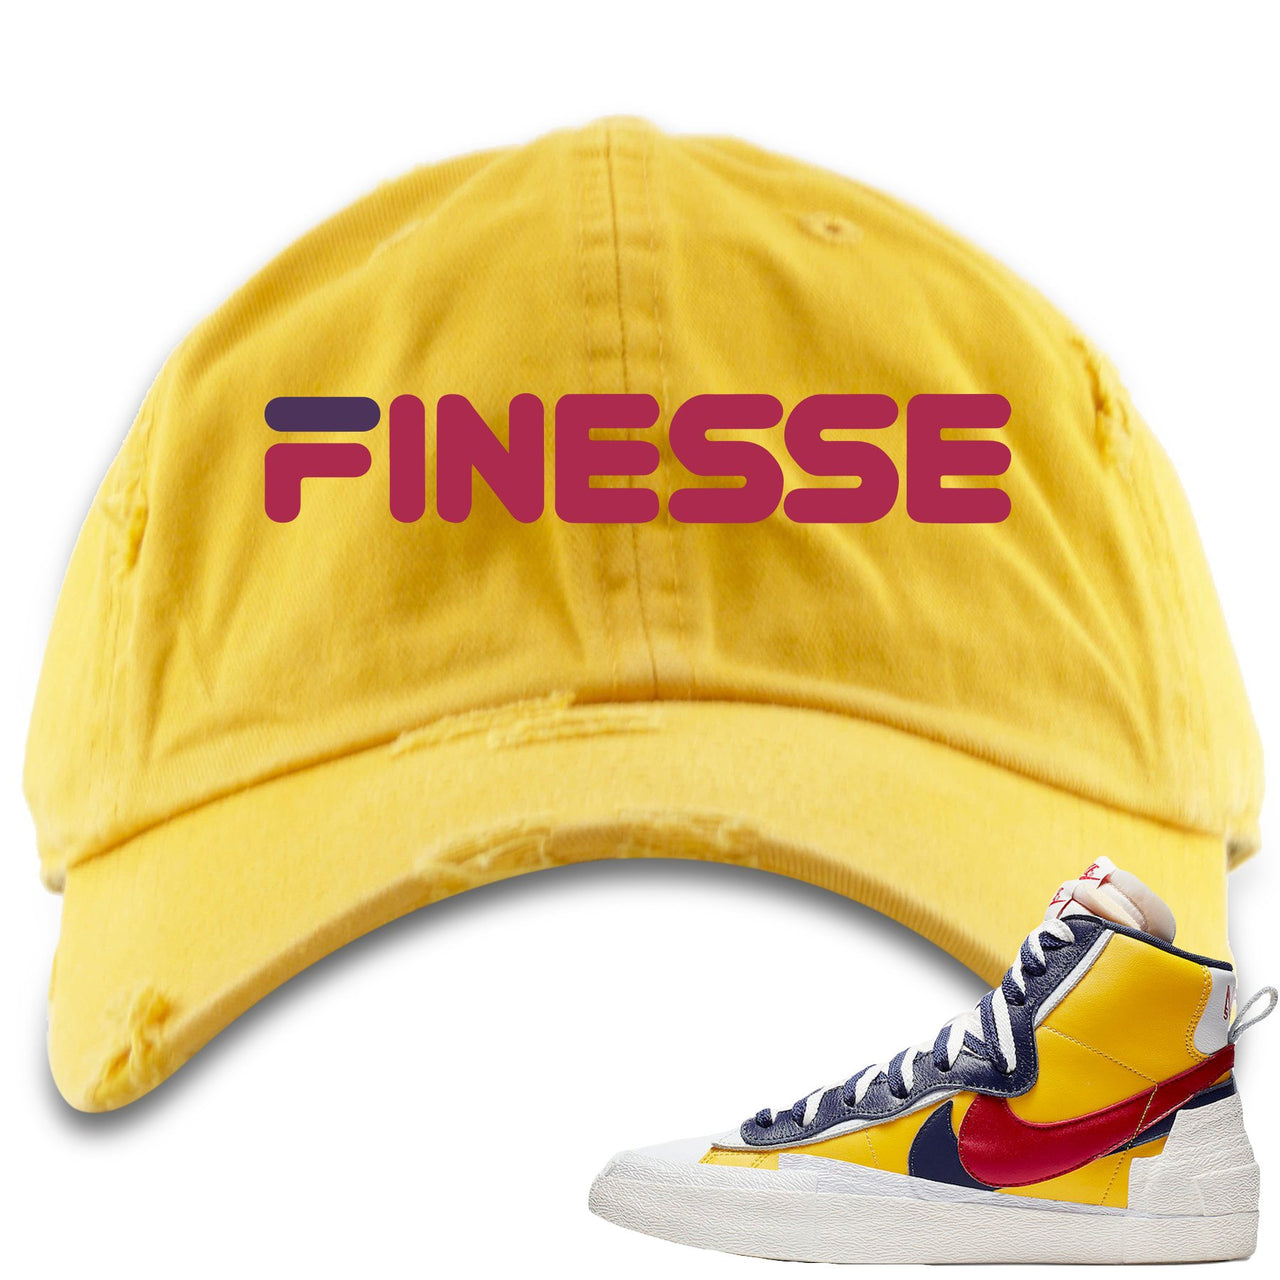 Varsity Maize Mid Blazers Distressed Dad Hat Finesse, Yellow